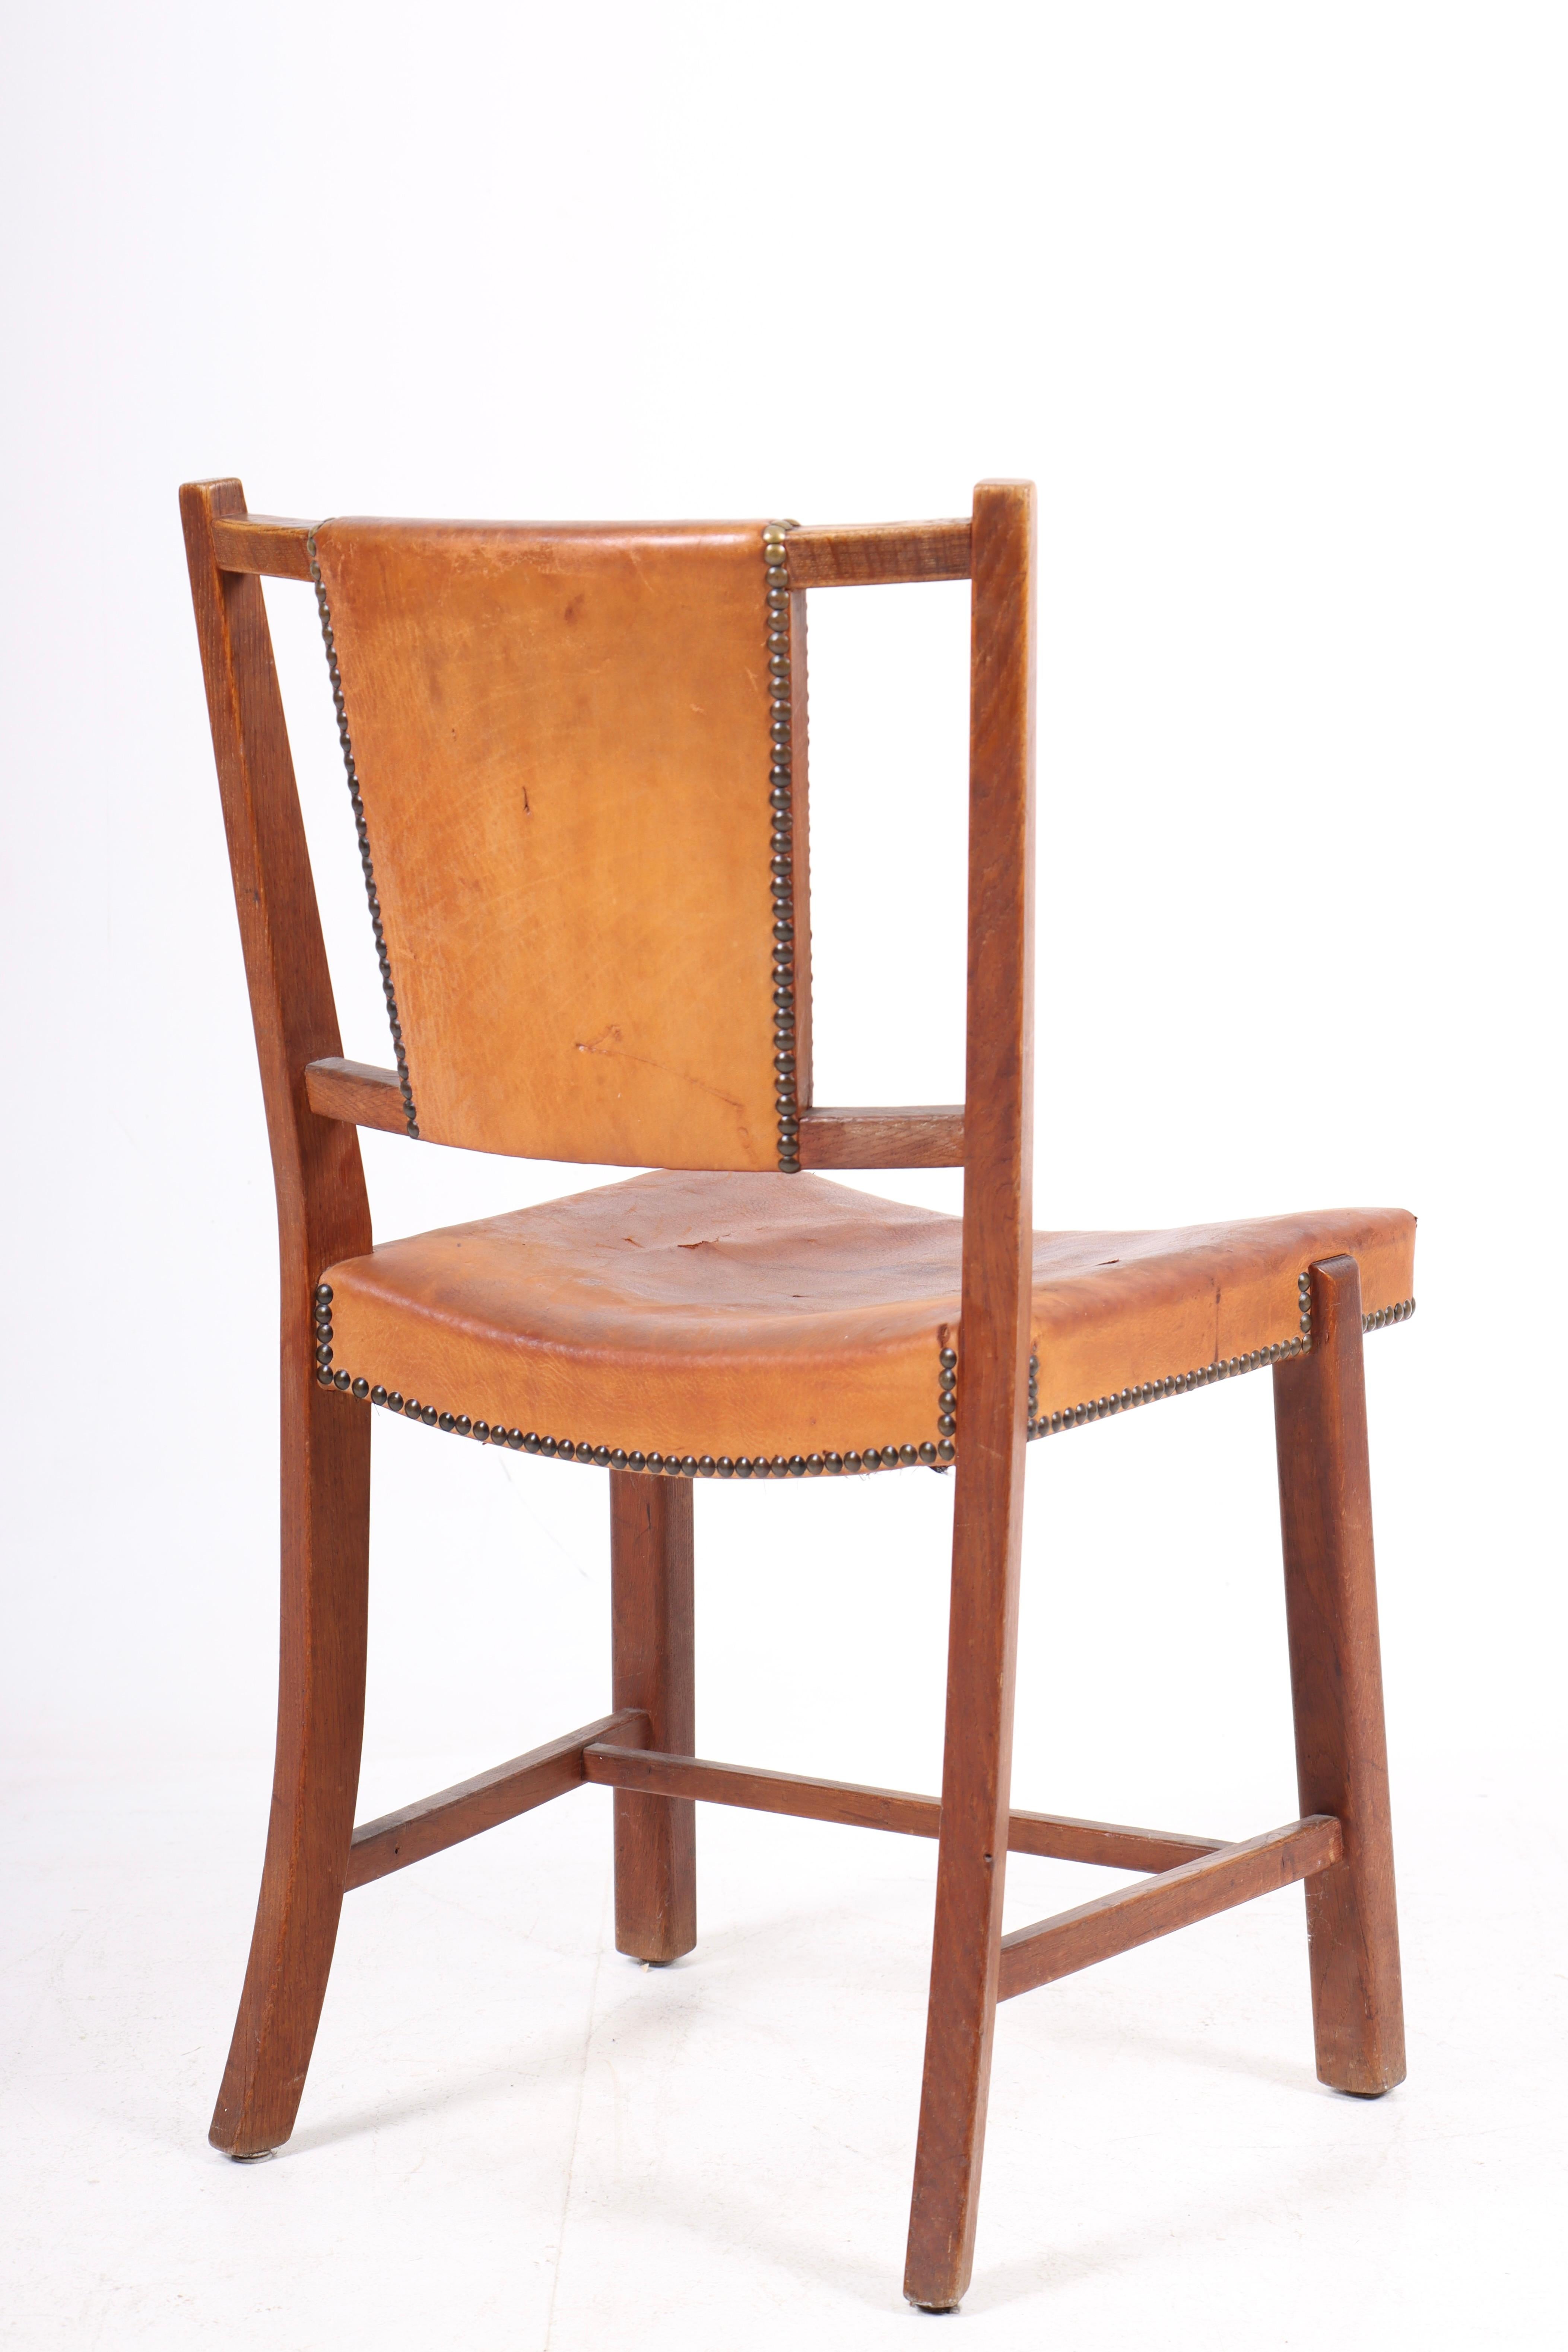 Danish Side Chair in Patinated Leather, 1940s For Sale 1